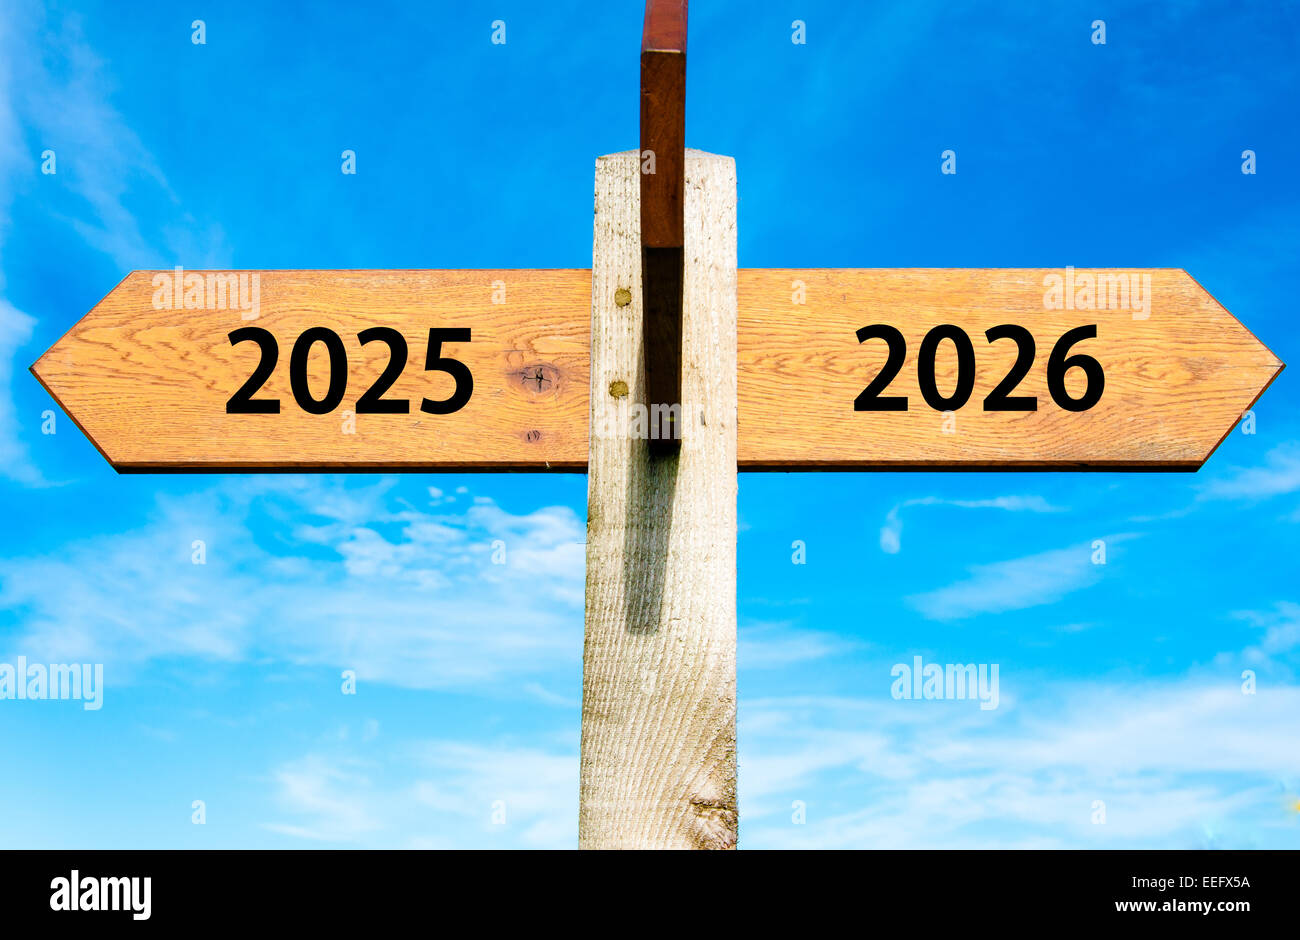 Wooden signpost with two opposite arrows over clear blue sky, year 2025 and 2026 signs, Happy New Year conceptual image Stock Photo